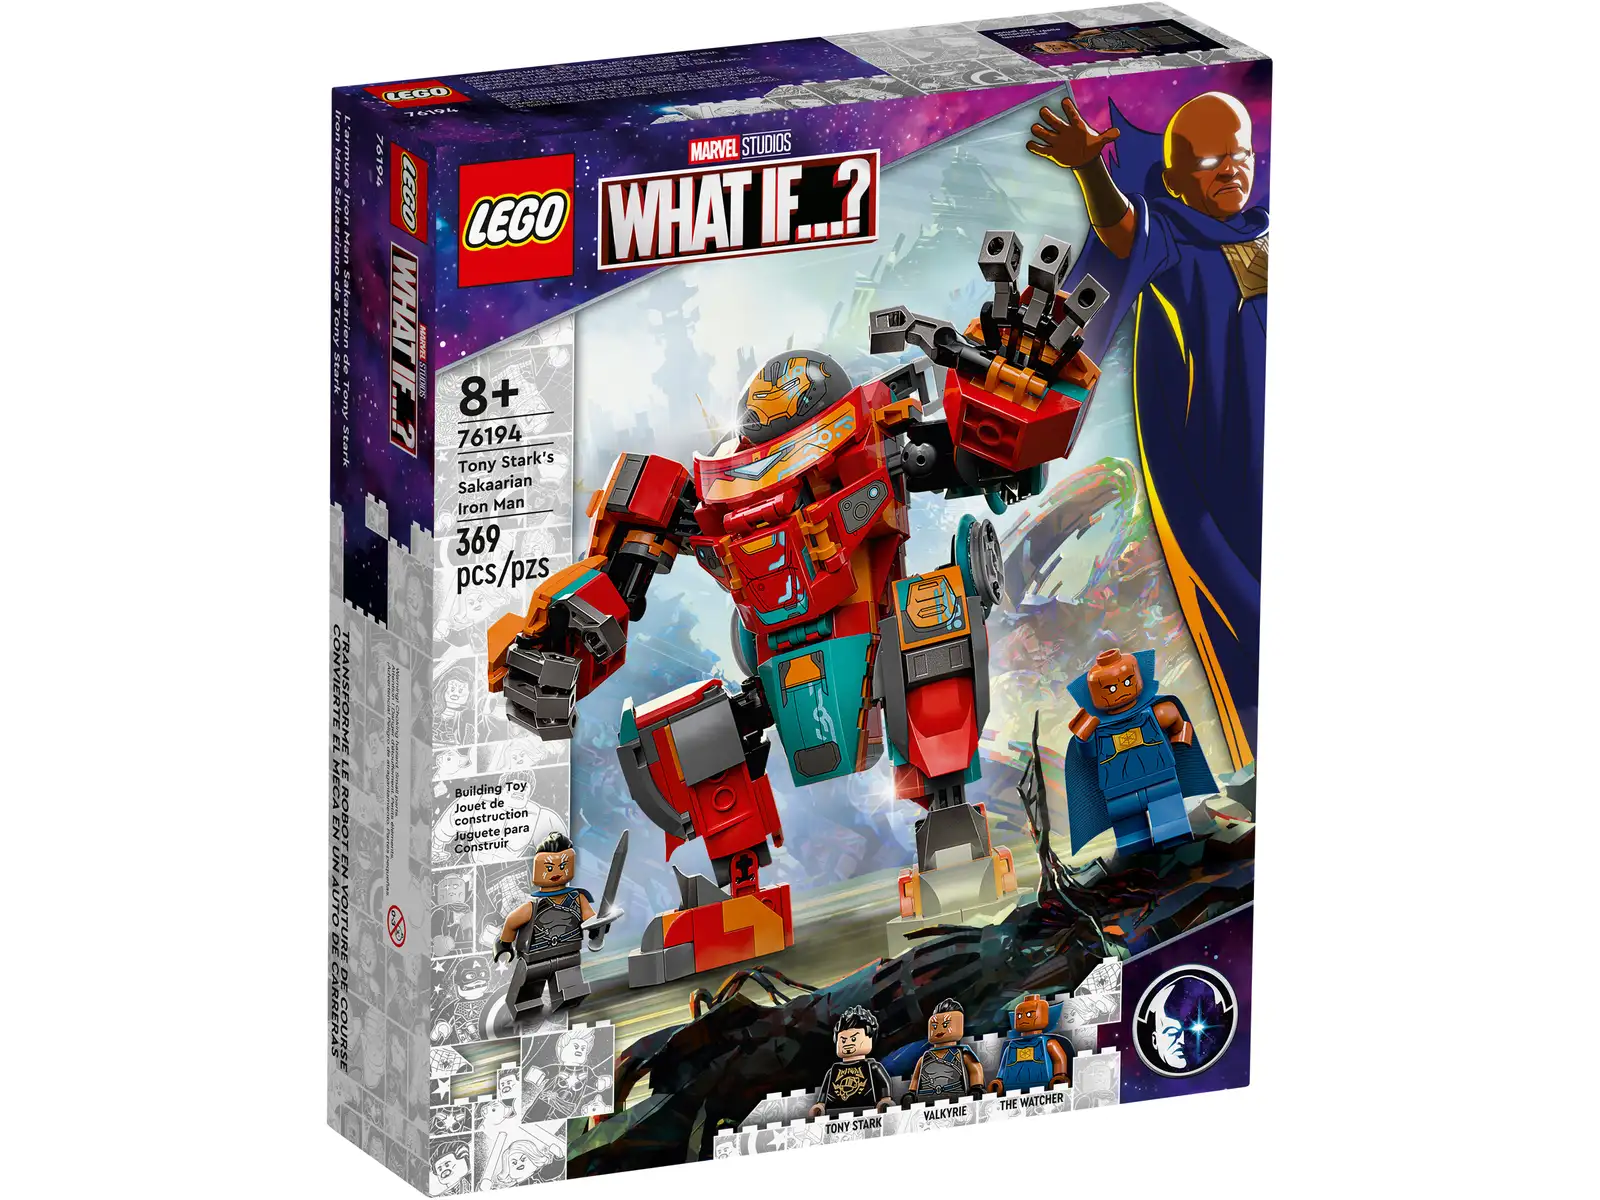 Take Marvel fans to a new dimension of build-and-play, imaginative adventure with LEGO® Marvel Tony Stark’s Sakaarian Iron Man (76194). This landmark LEGO Marvel set lets kids aged 8 and up recreate scenes from the animated Marvel Studios’ What If...? series on Disney+ and explore new stories from the Marvel Cinematic Universe. New stories with iconic Super Hero characters This exciting expansion of the Marvel Cinematic Universe features 3 minifigures – Tony Stark, Valkyrie and The Watcher – and a buildable mech that can also be rebuilt into a powerful-looking car. Kids place the Tony Stark minifigure into the Sakaarian Iron Man mech. This mechanical giant is highly posable, allowing kids to twist and turn the mech as it advances into Super Hero action. When there’s a need for speed, kids rebuild the mighty mech into a power-packed vehicle and race off for more amazing adventures. This LEGO® Marvel Tony Stark’s Sakaarian Iron Man (76194) set brings Marvel Studios’ What If...? TV series to life and takes kids to a new dimension of build-and-play, imaginative adventures. Includes Tony Stark, Valkyrie and The Watcher minifigures, plus a buildable mech that can also be rebuilt into a powerful-looking vehicle. Kids place the Tony Stark minifigure into the highly posable Sakaarian Iron Man mech ready for Super Hero action. When there’s a need for speed, the mech can berebuilt into a power-packed car. Put kids aged 8+ who love Marvel Studios’ What If...? , on Disney+, and the Marvel films at the center of the latest Super Hero action with the terrifically transformable Sakaarian Iron Man mech. The posable mech stands over 5 in. (15 cm) tall and rebuilds into a Tony Stark-style race car. There are more LEGO® Marvel mechs for kids to collect and combine to bring Super Hero movie action to life and inspire never-ending imaginative stories of their own. LEGO® components meet stringent industry standards to ensure they are reliable, compatible and connect and pull apart consistently every time – it’s been that way since 1958. LEGO® components are dropped, heated, crushed, twisted and analyzed to make sure they meet rigorous global safety standards.